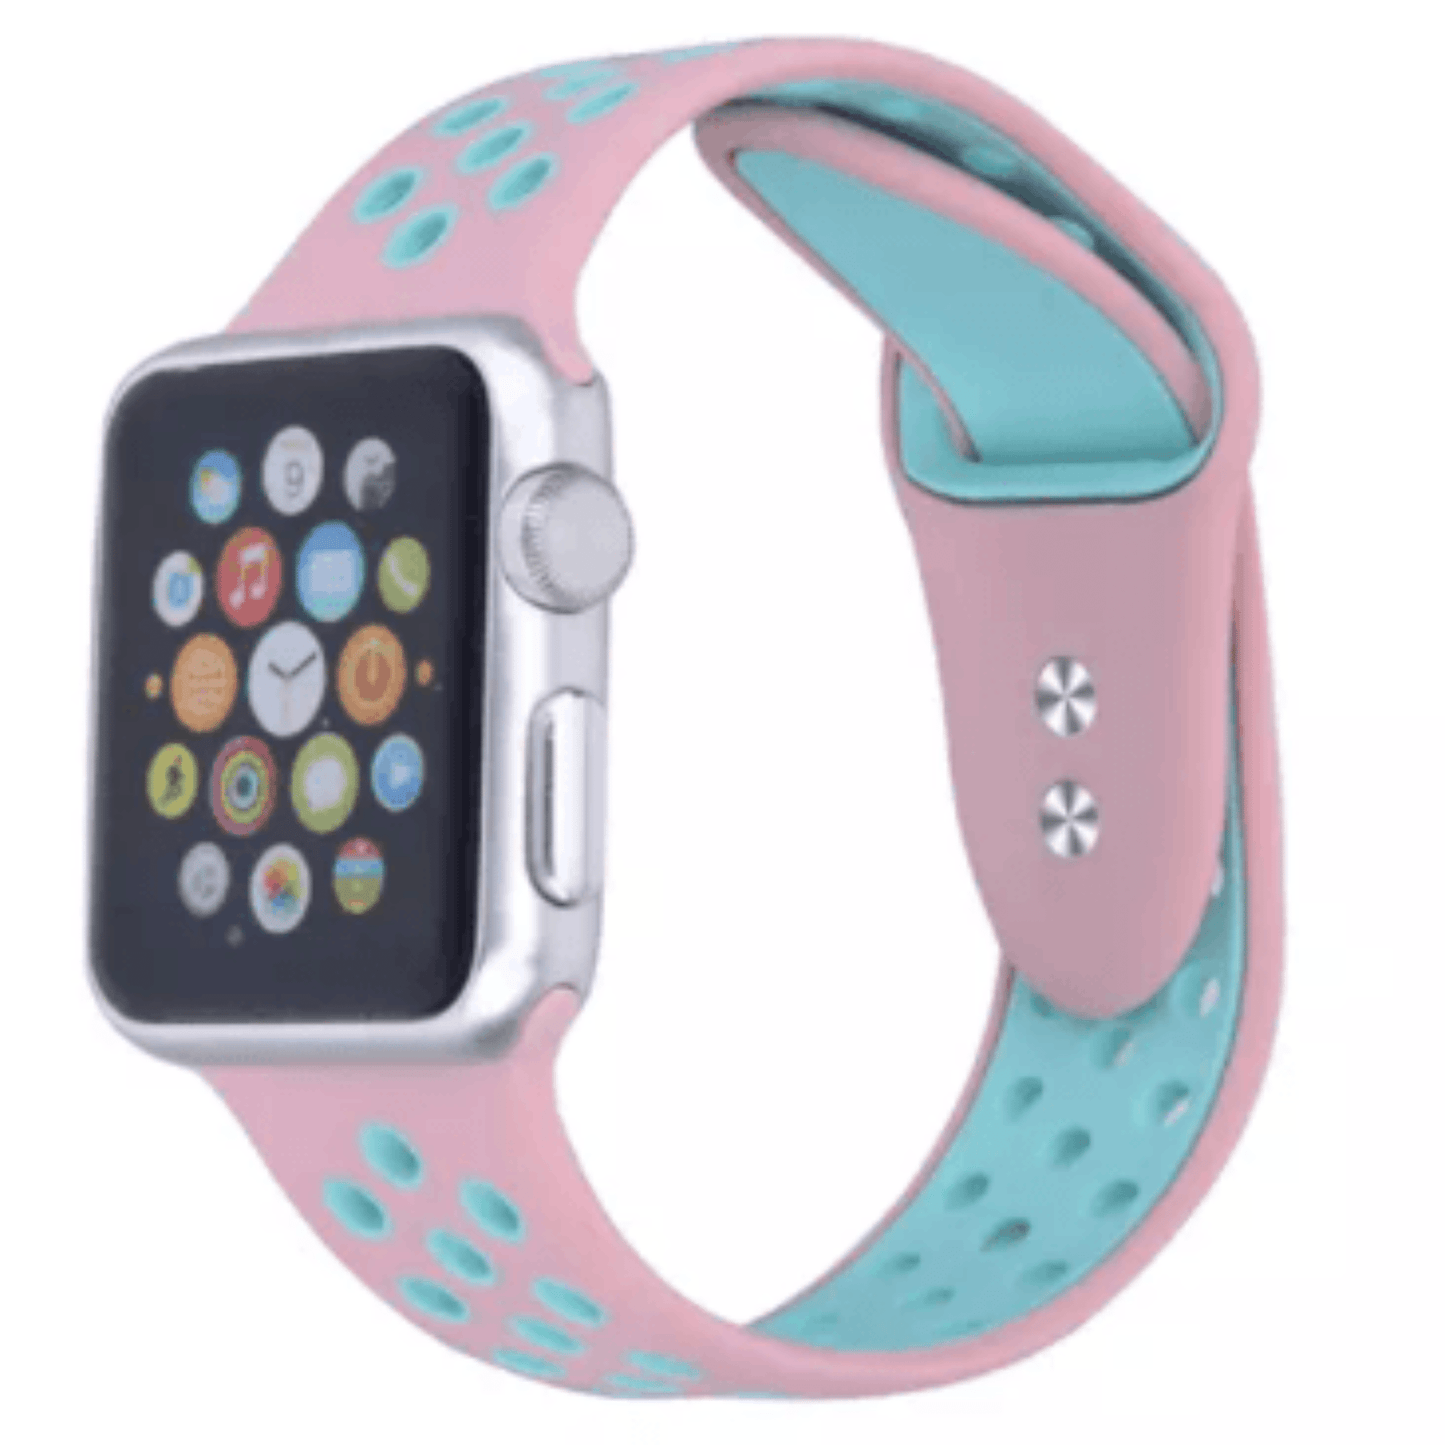 Breathable Silicone Sport Replacement Band for Apple Watch Pink Mint Apple Watch Band Elements Watches